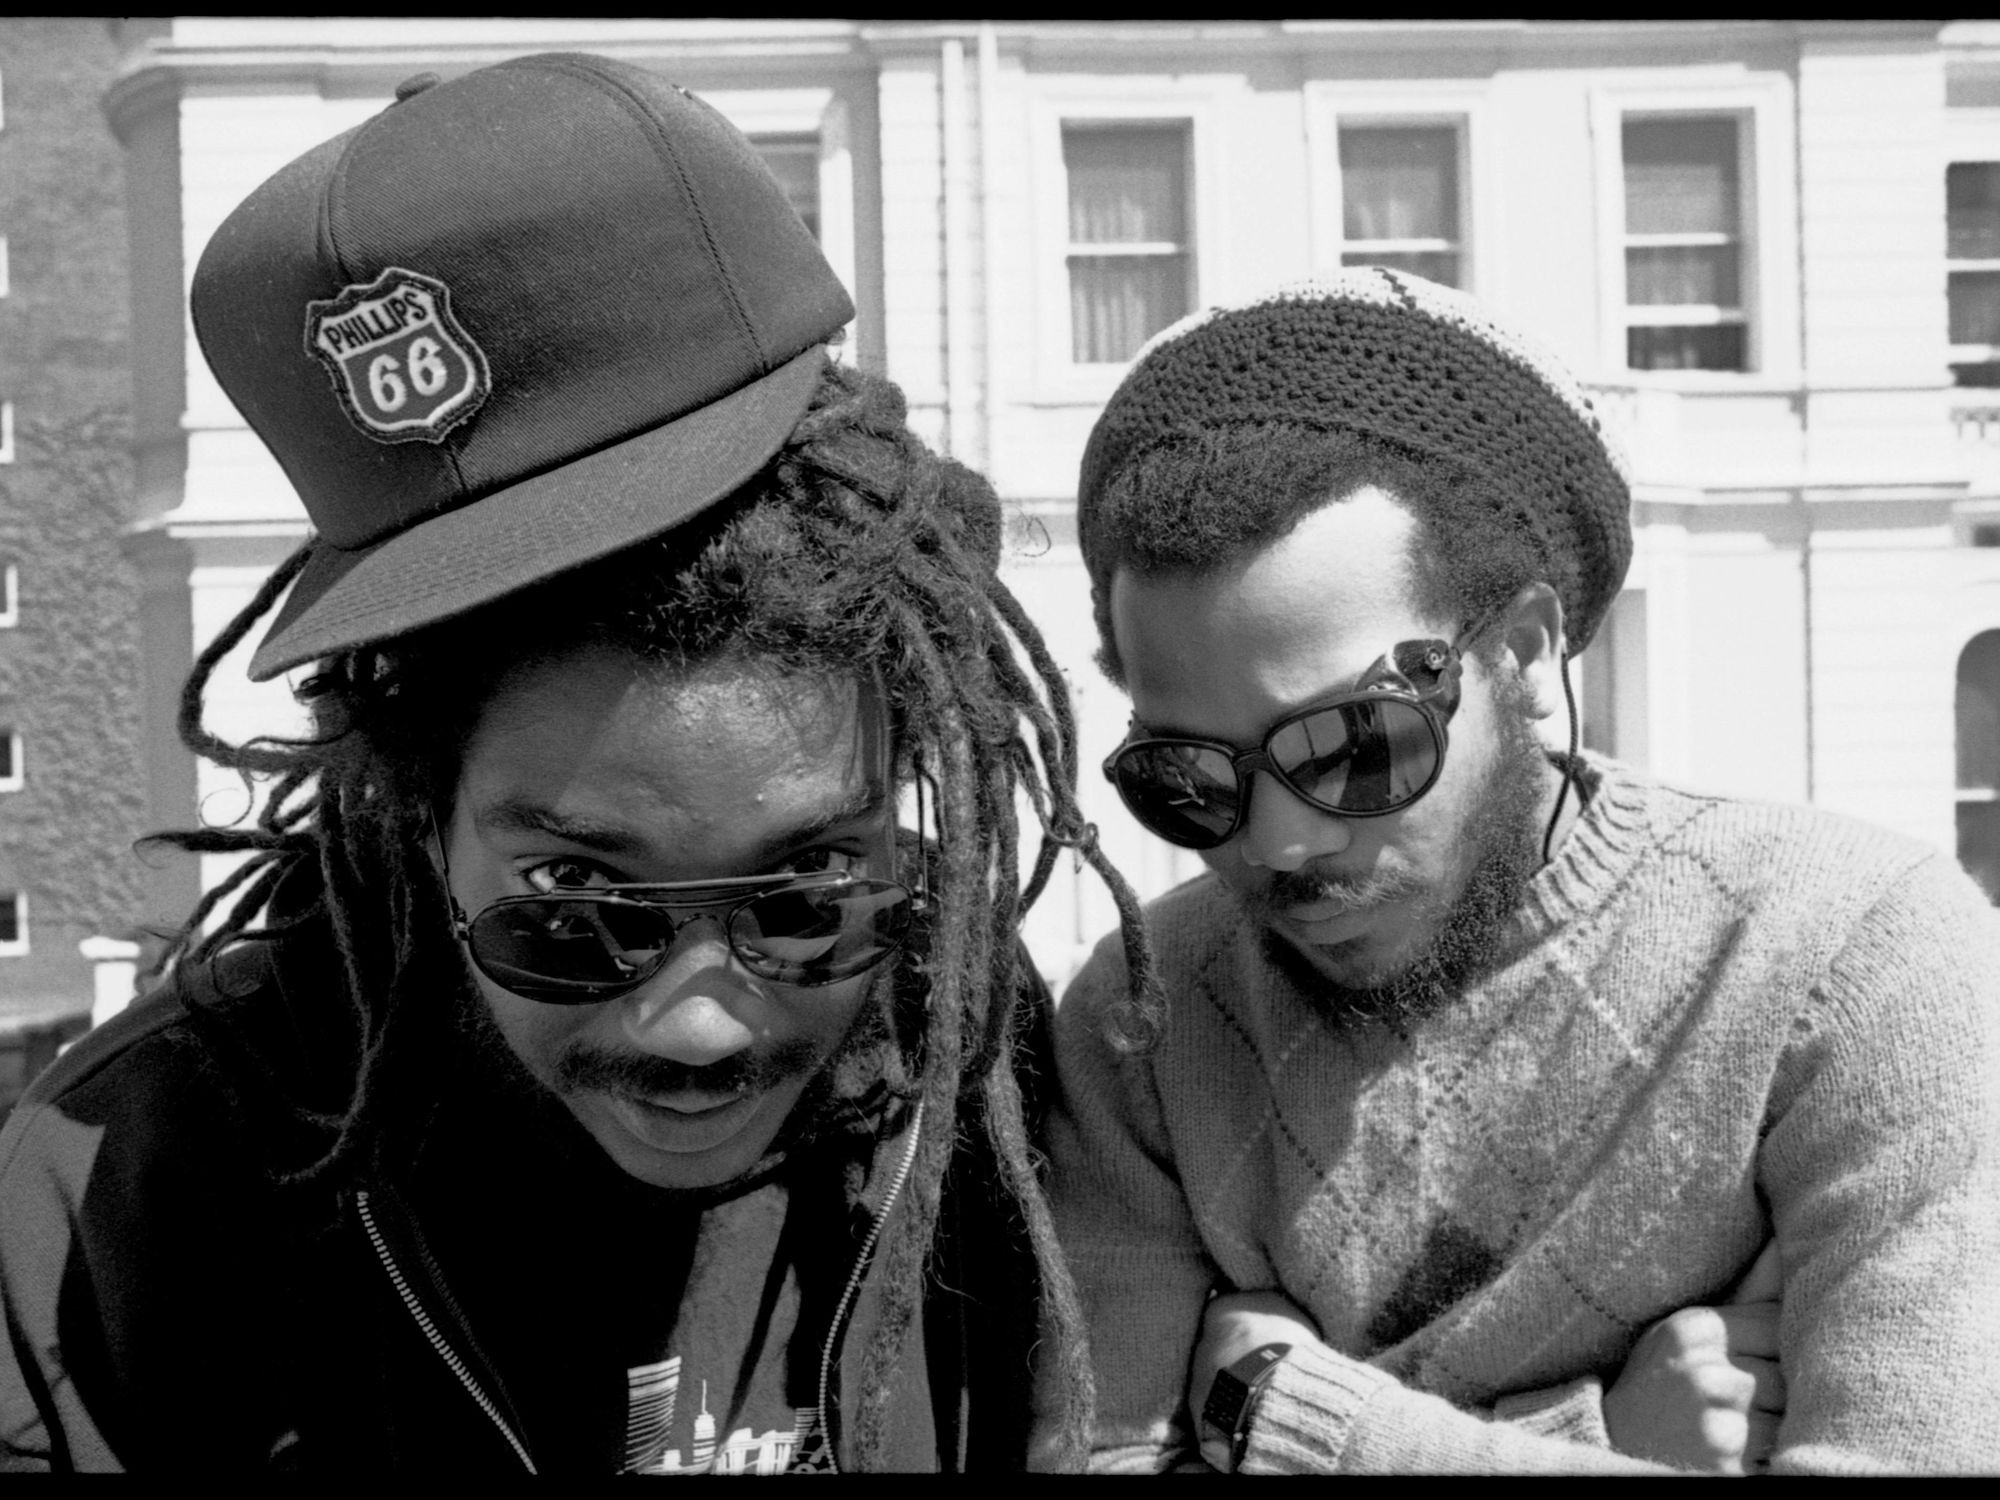 Photo of pioneering black punk band Bad Brains with dreads and baseball cap in London in black and white.